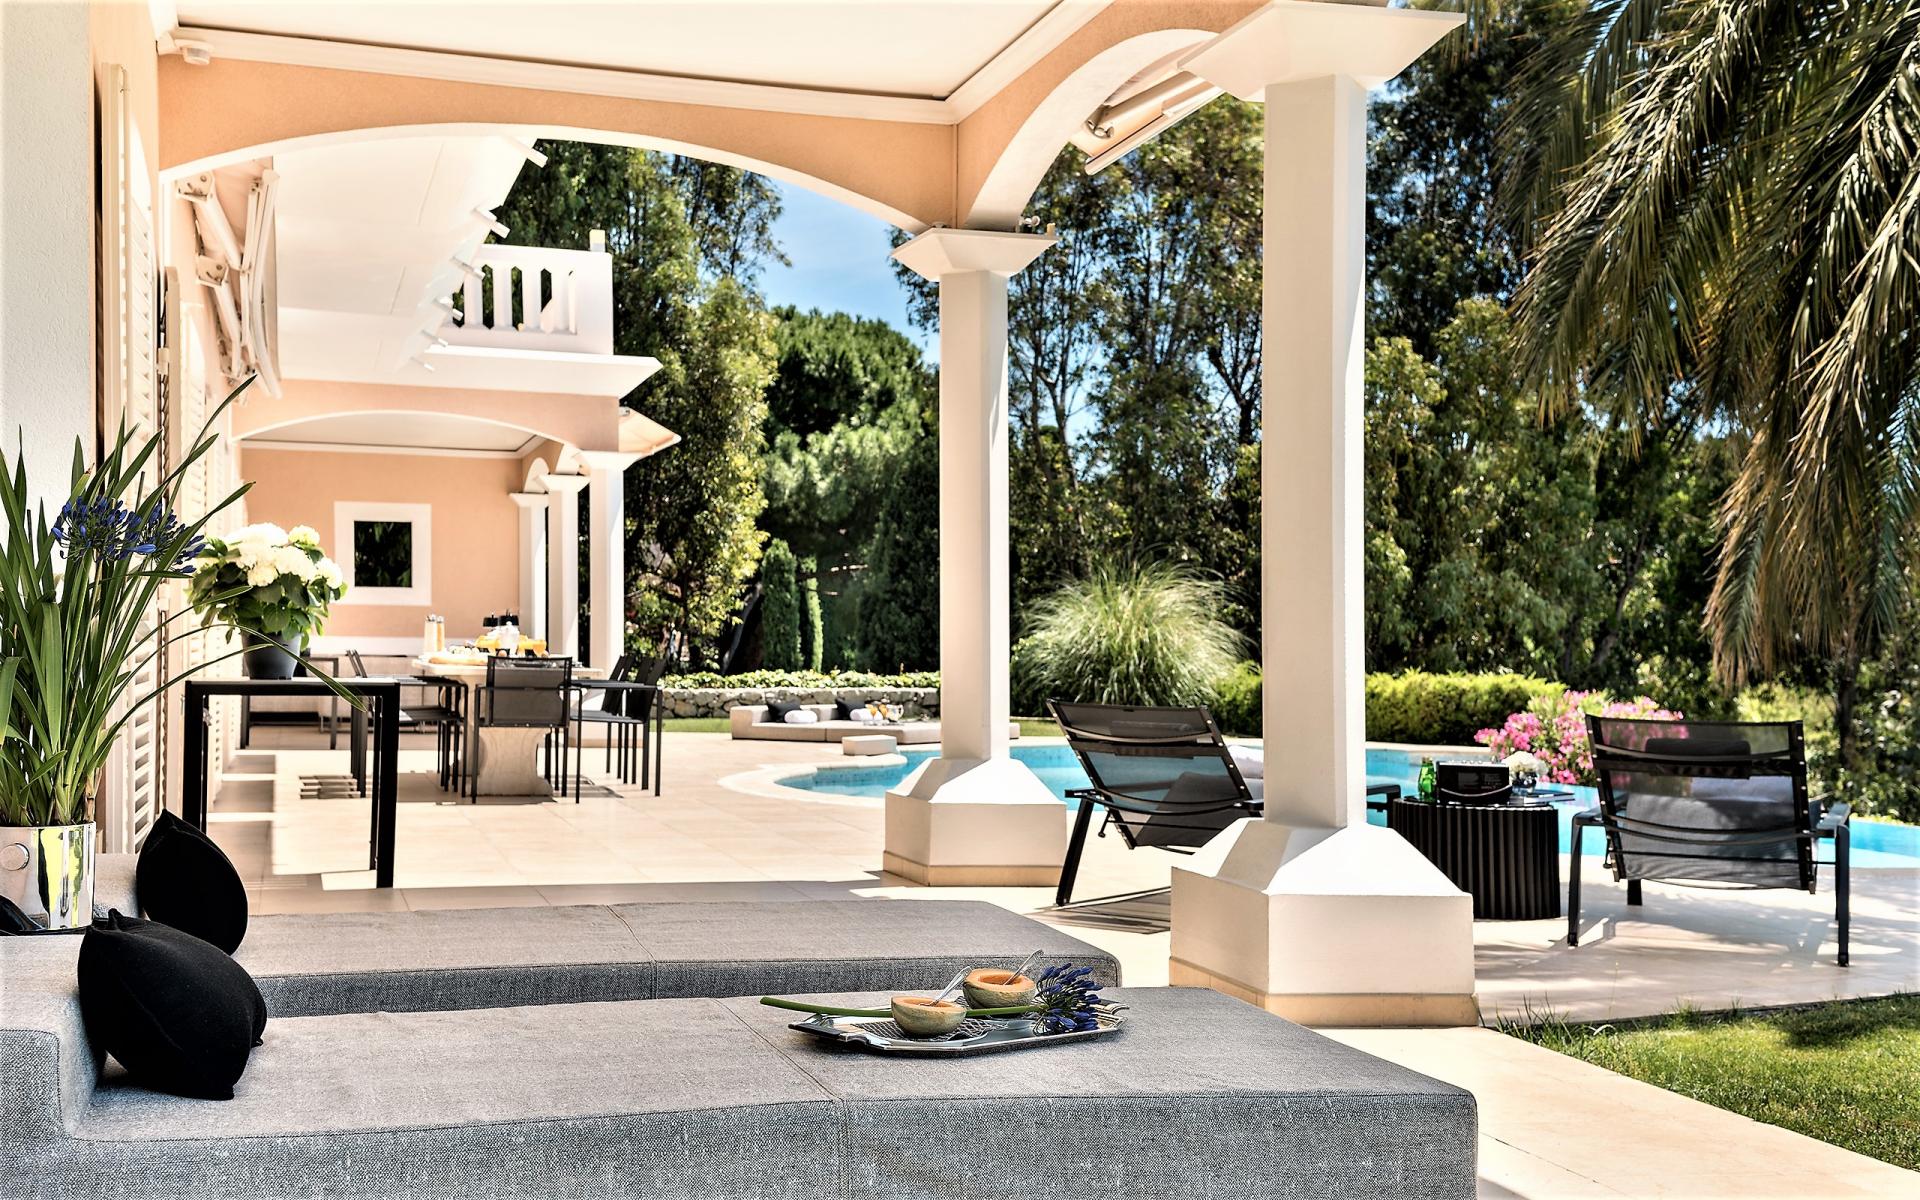 RELAX AND HAVE A REST AROUND THE SWIMMING POOL IN VILLA ROSE